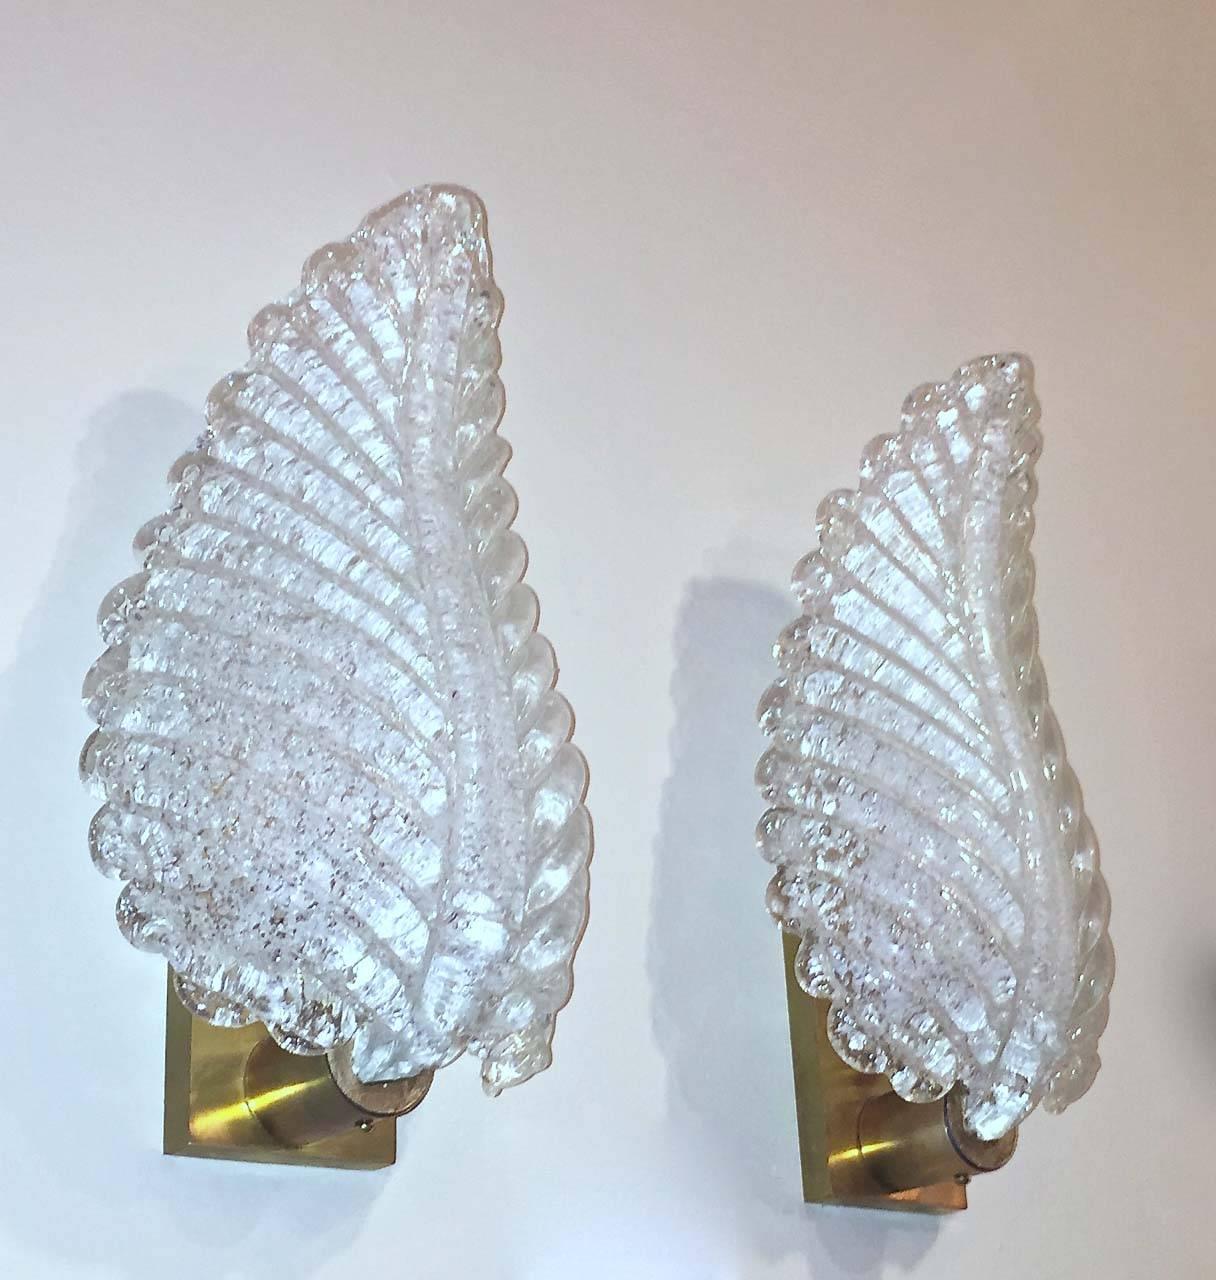 Pair of Murano glass wall sconces in leaf form by Barovier & Toso. Reverse side of glass in the 